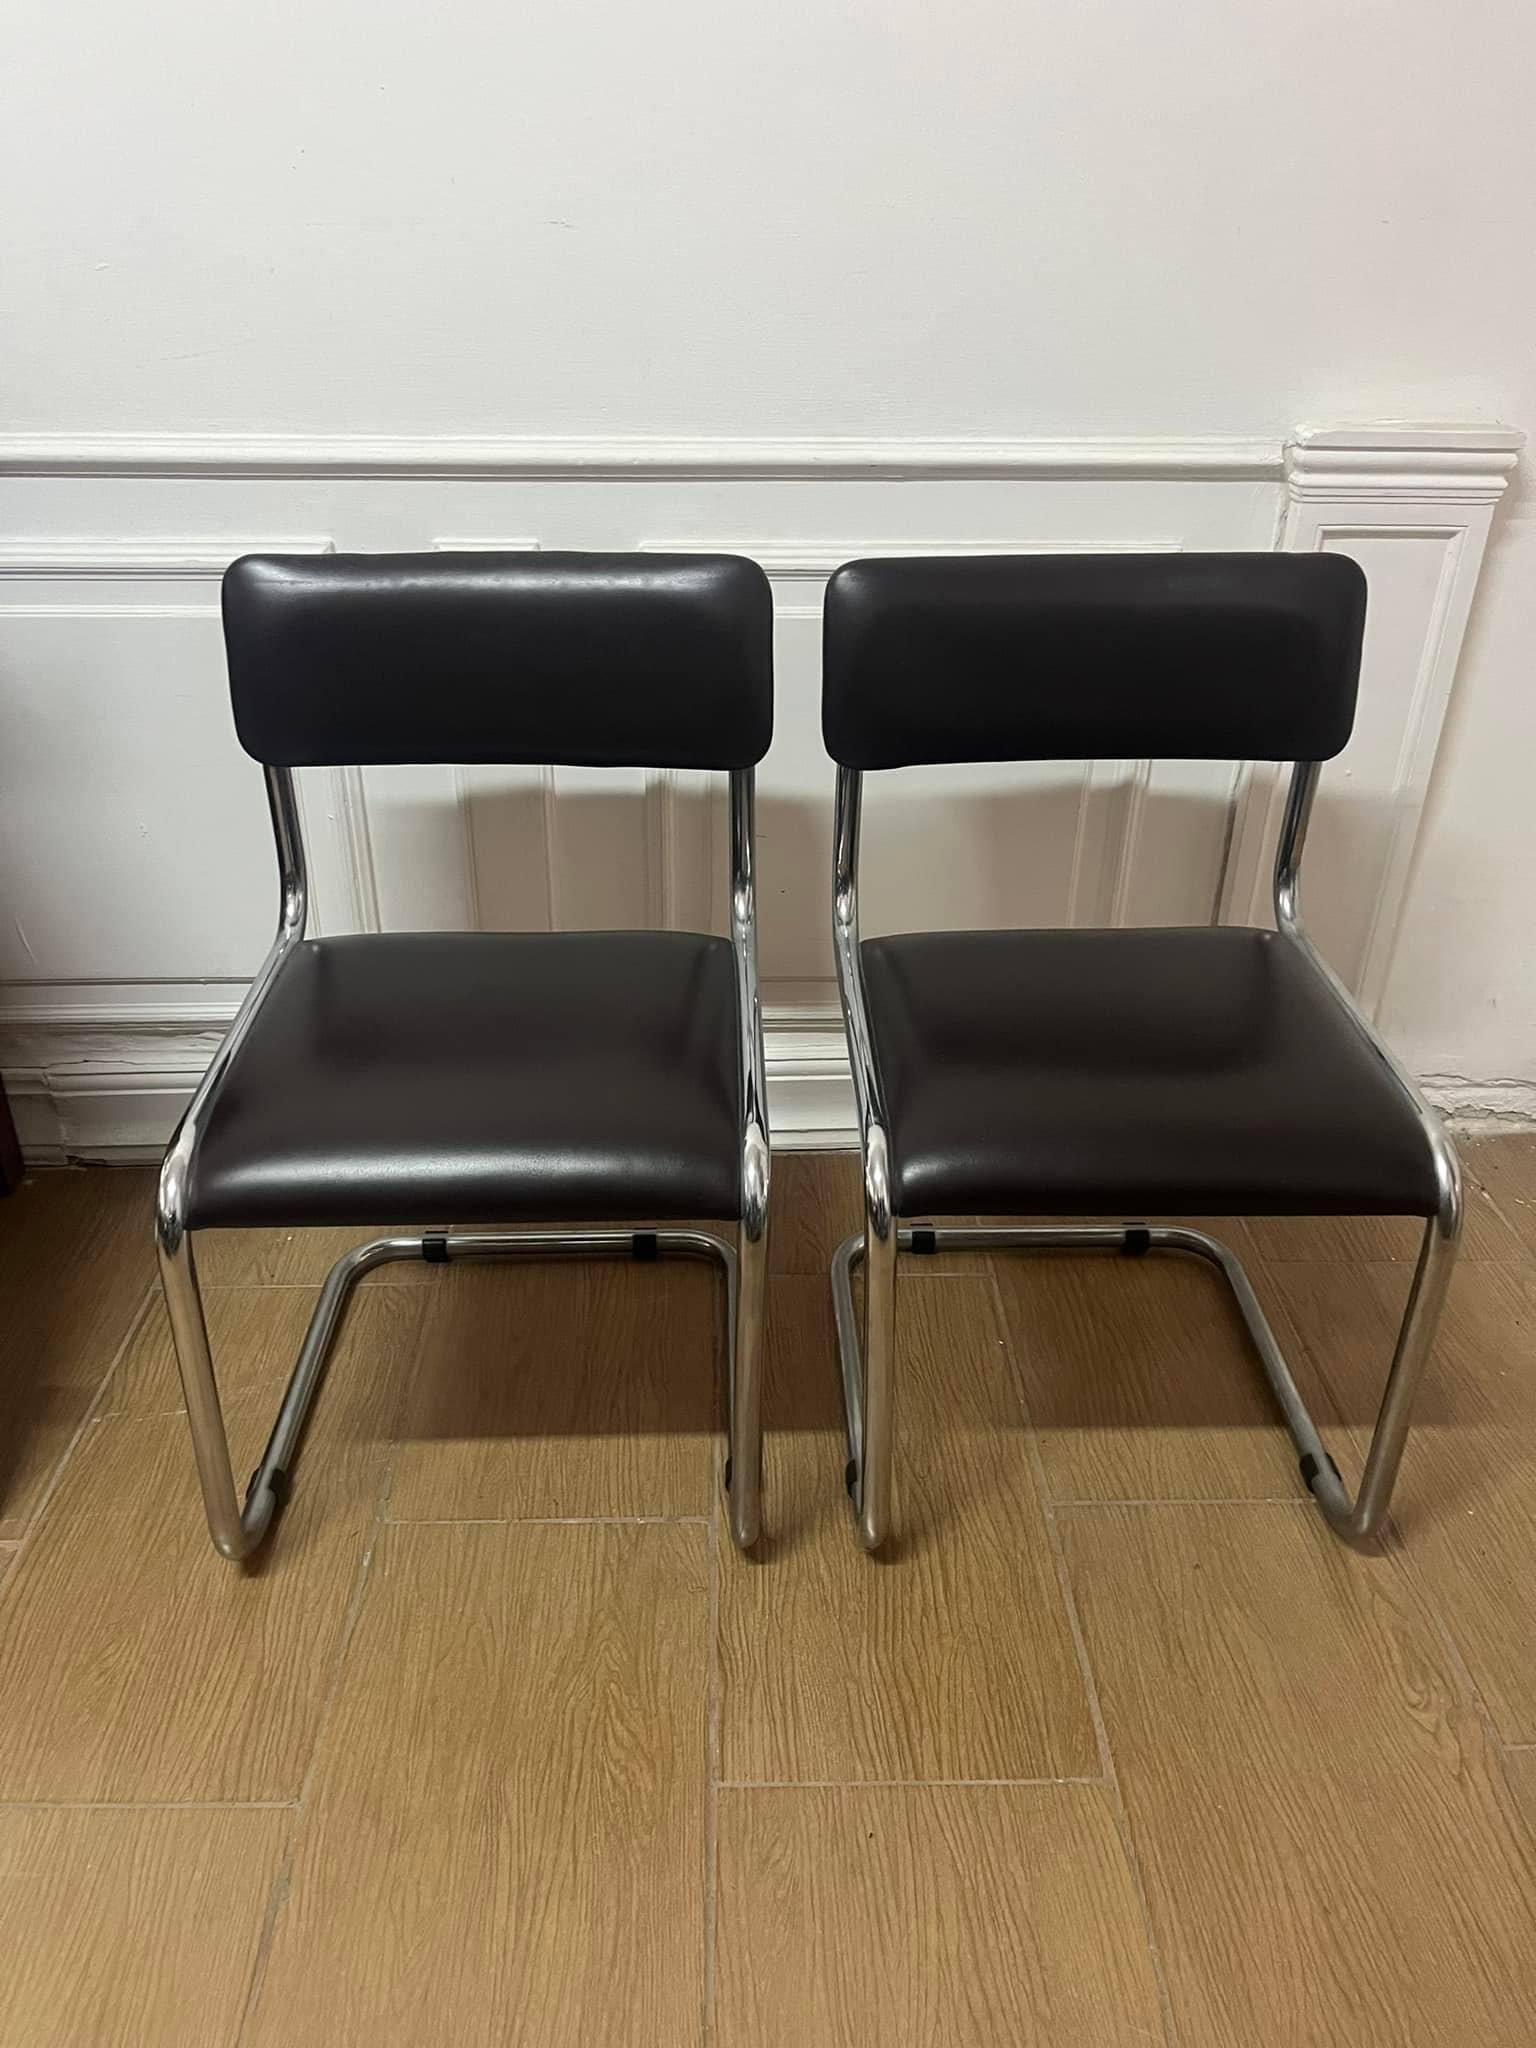 Late 20th Century Pair of Bauhaus Chairs For Sale